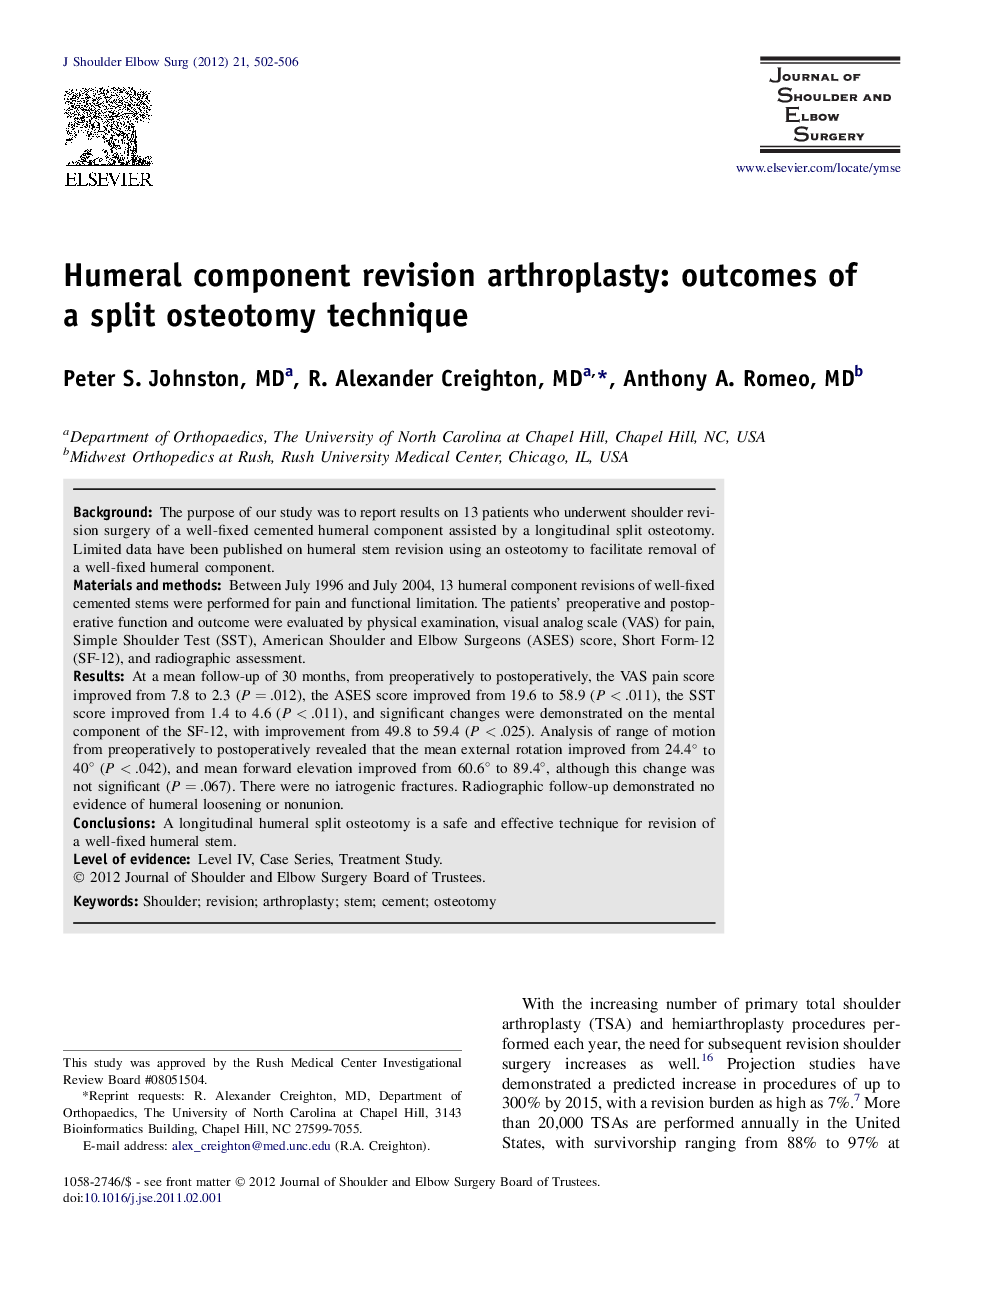 Humeral component revision arthroplasty: outcomes of a split osteotomy technique 